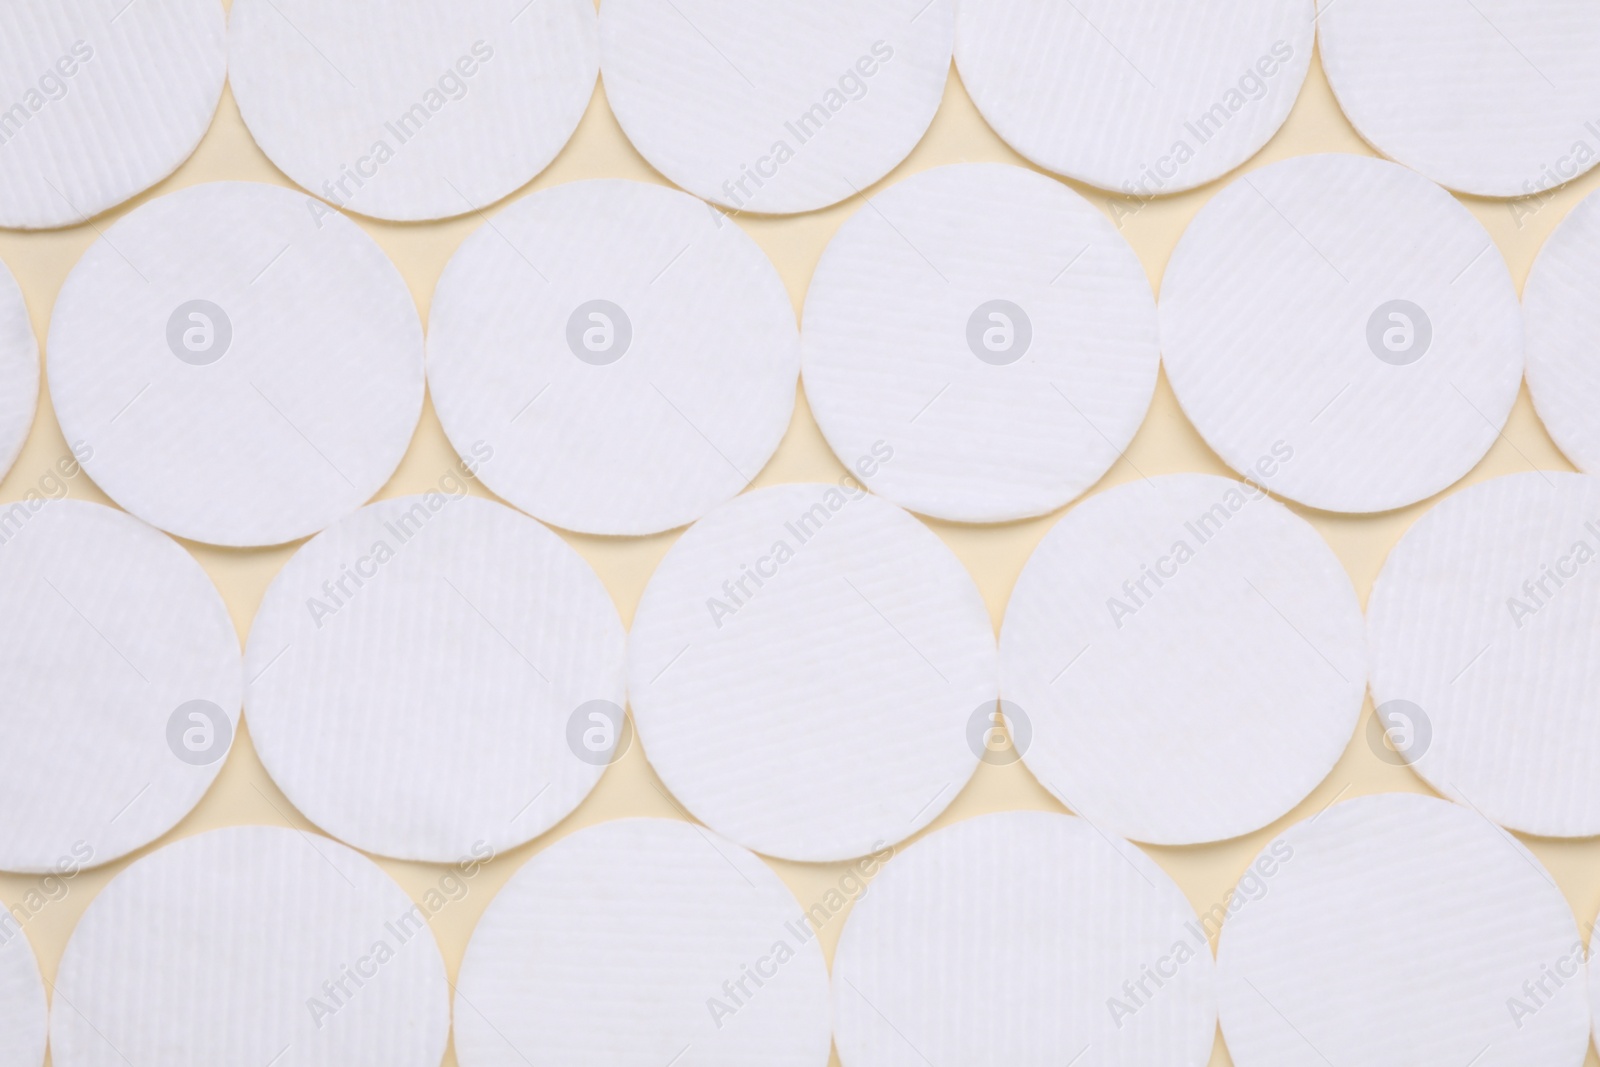 Photo of Many clean cotton pads on yellow background, flat lay